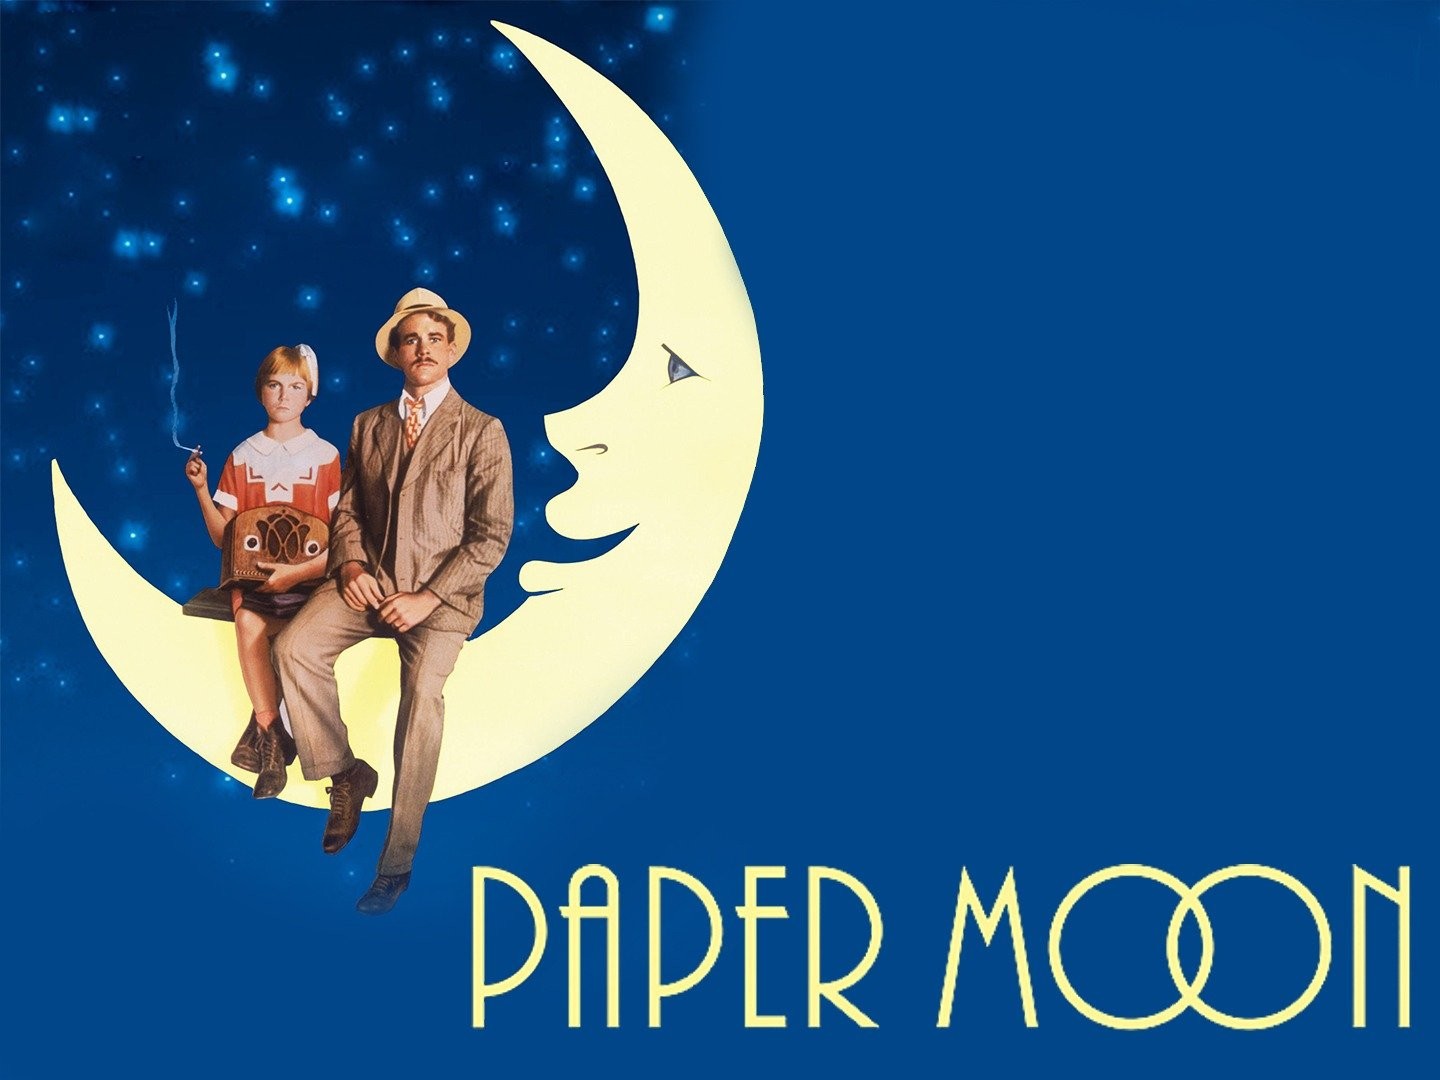 My Meaningful Movies: Paper Moon